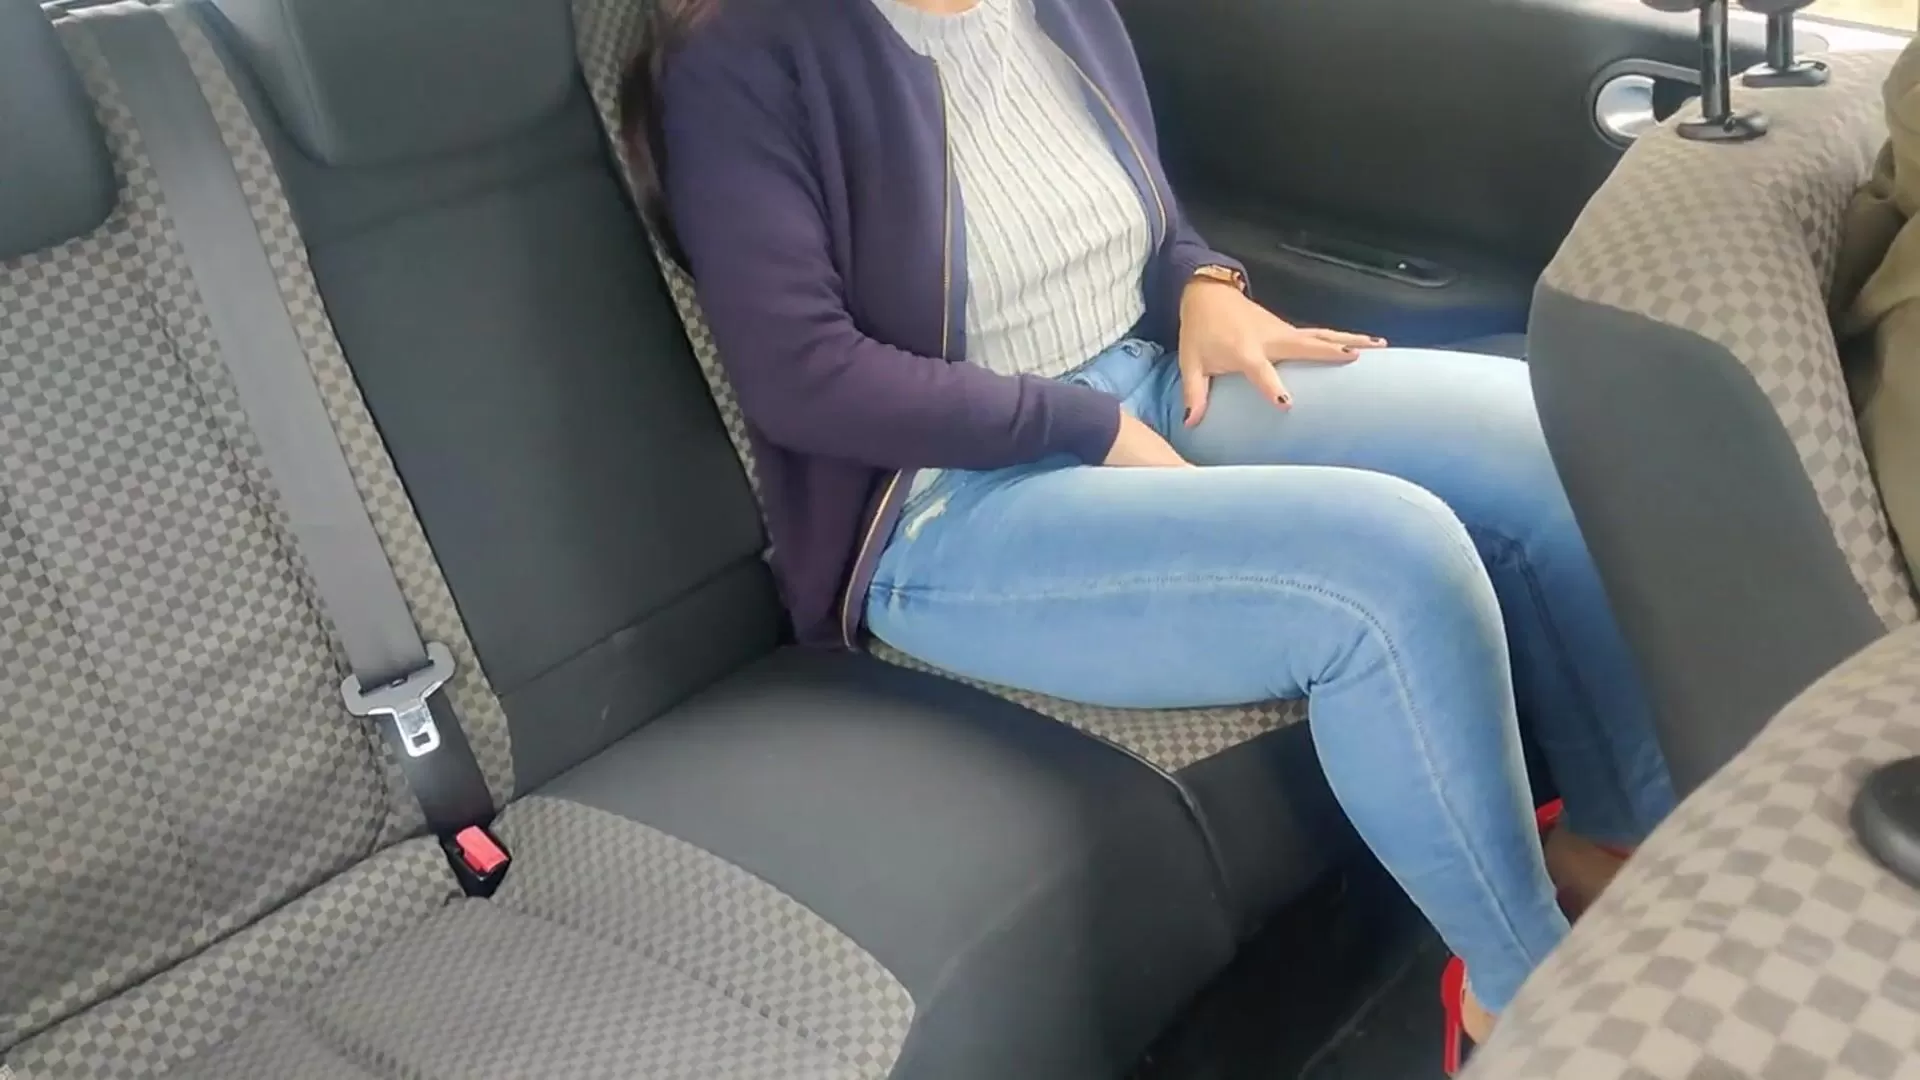 Busy worker in red heels masturbates her pussy and ass in a car taxi/uber watch online photo